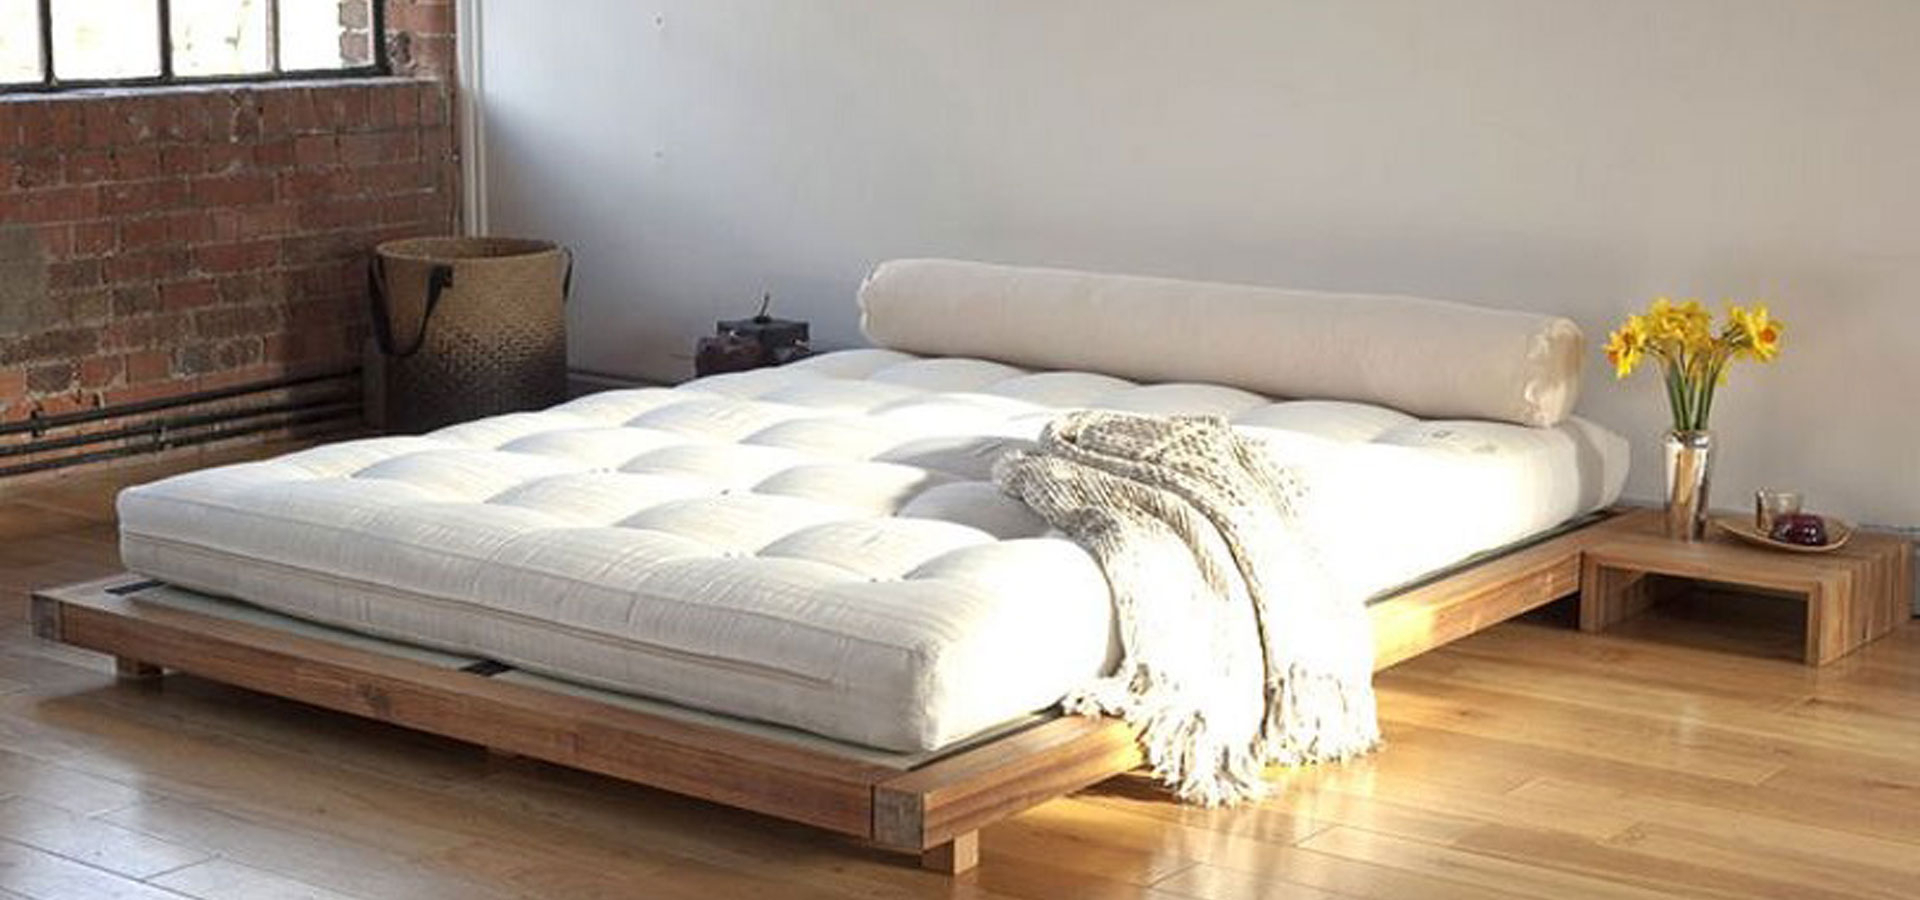 low frame bed with mattress